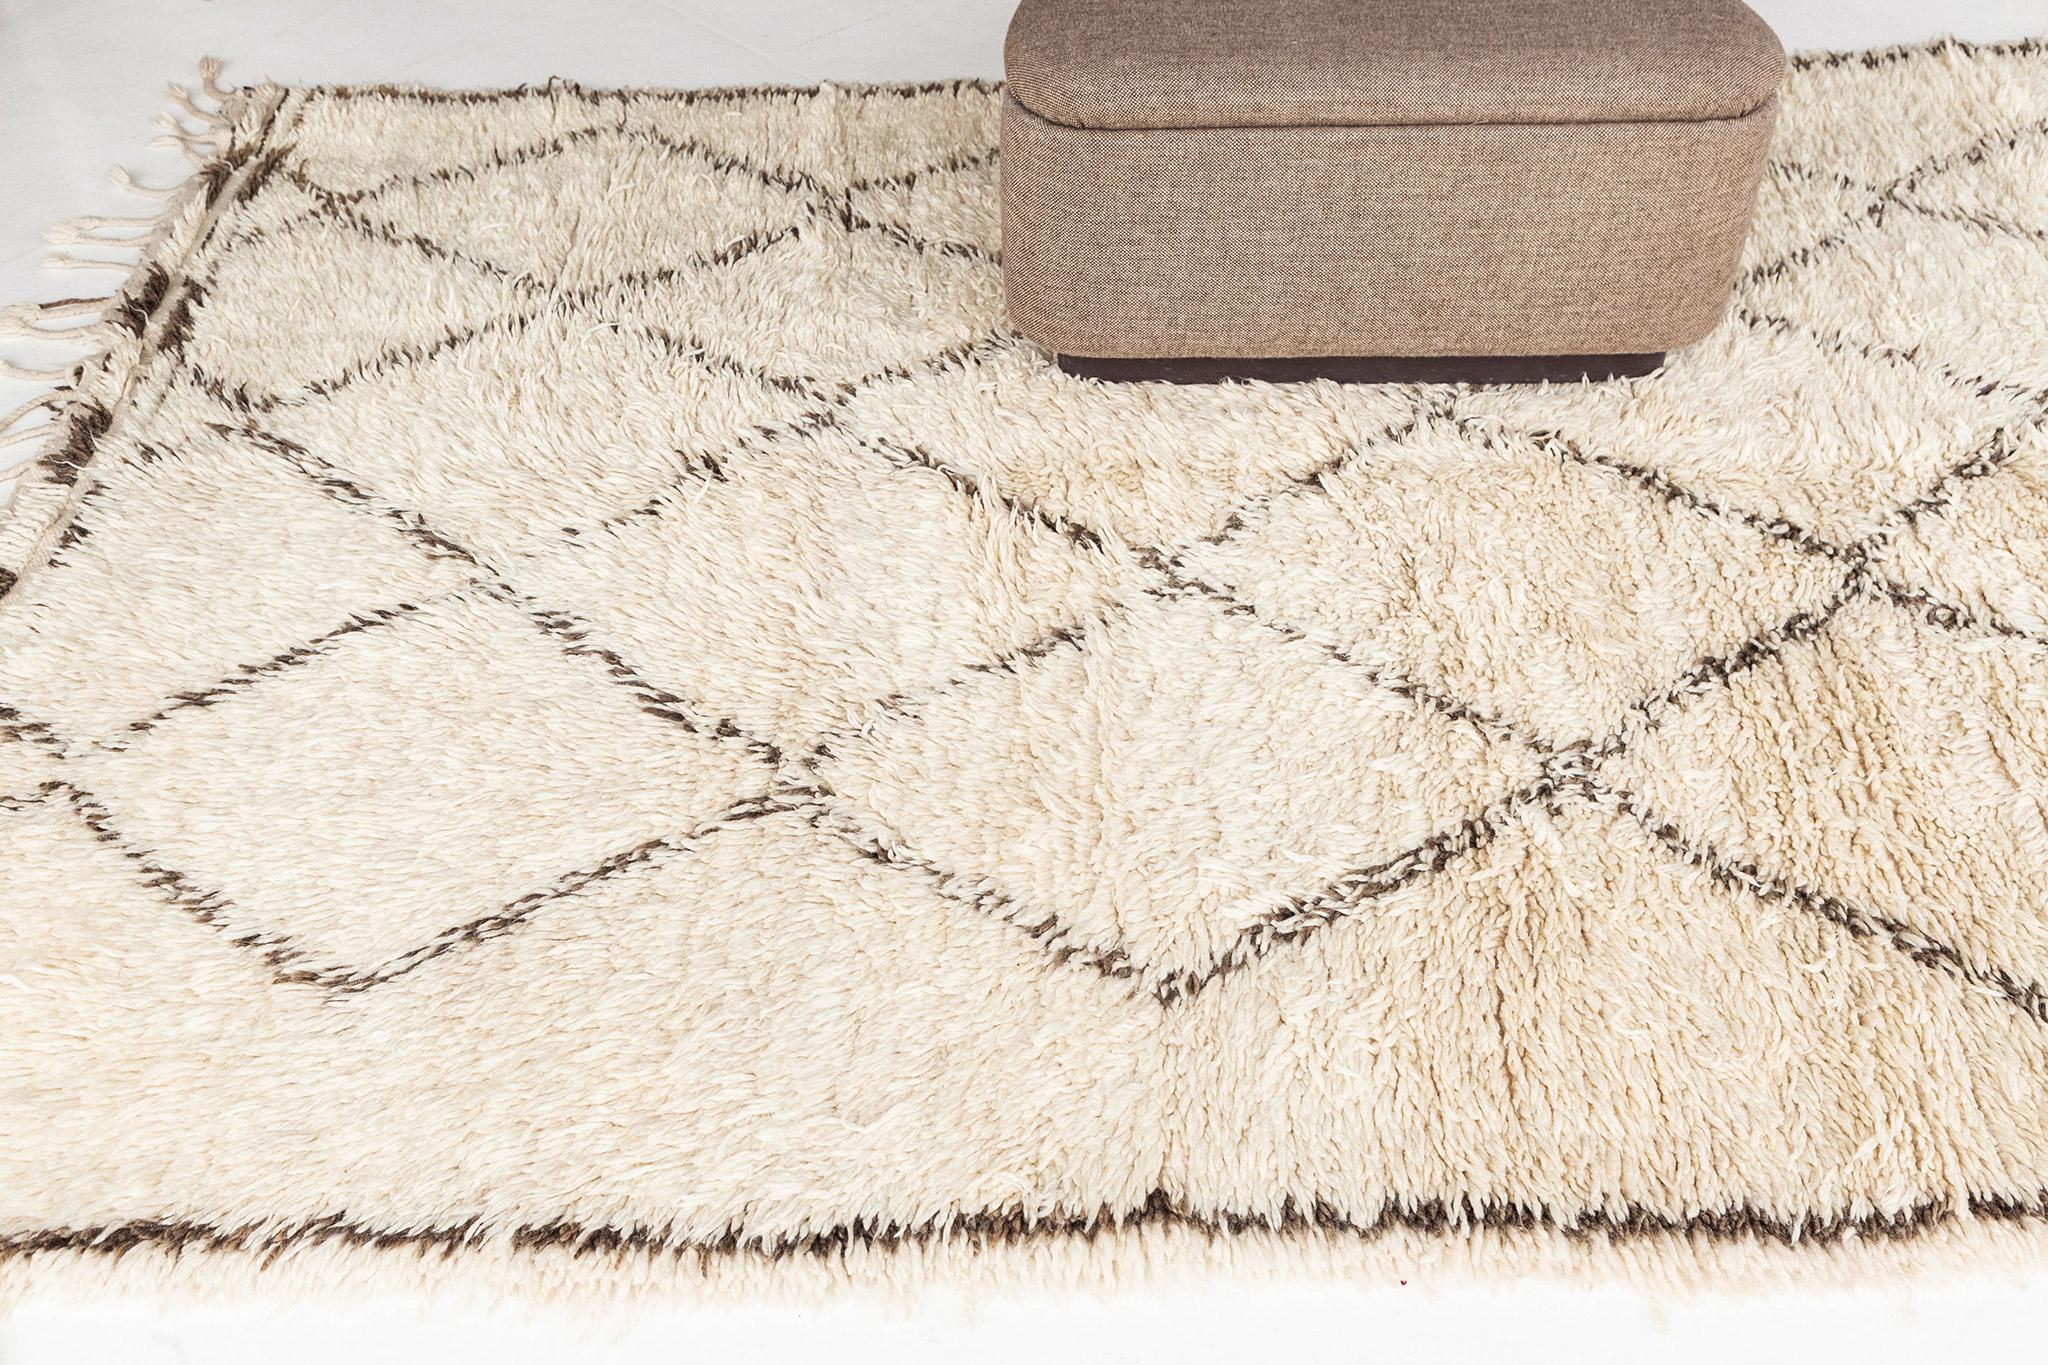 Ivory field with diamond lattice motif rendered in speckled taupe wool. Linear outline at left and right edge, and alternate rows of pile and flatweave at top and bottom frame the field. A unique vintage rug from the Beni Ourain peoples of Morocco.